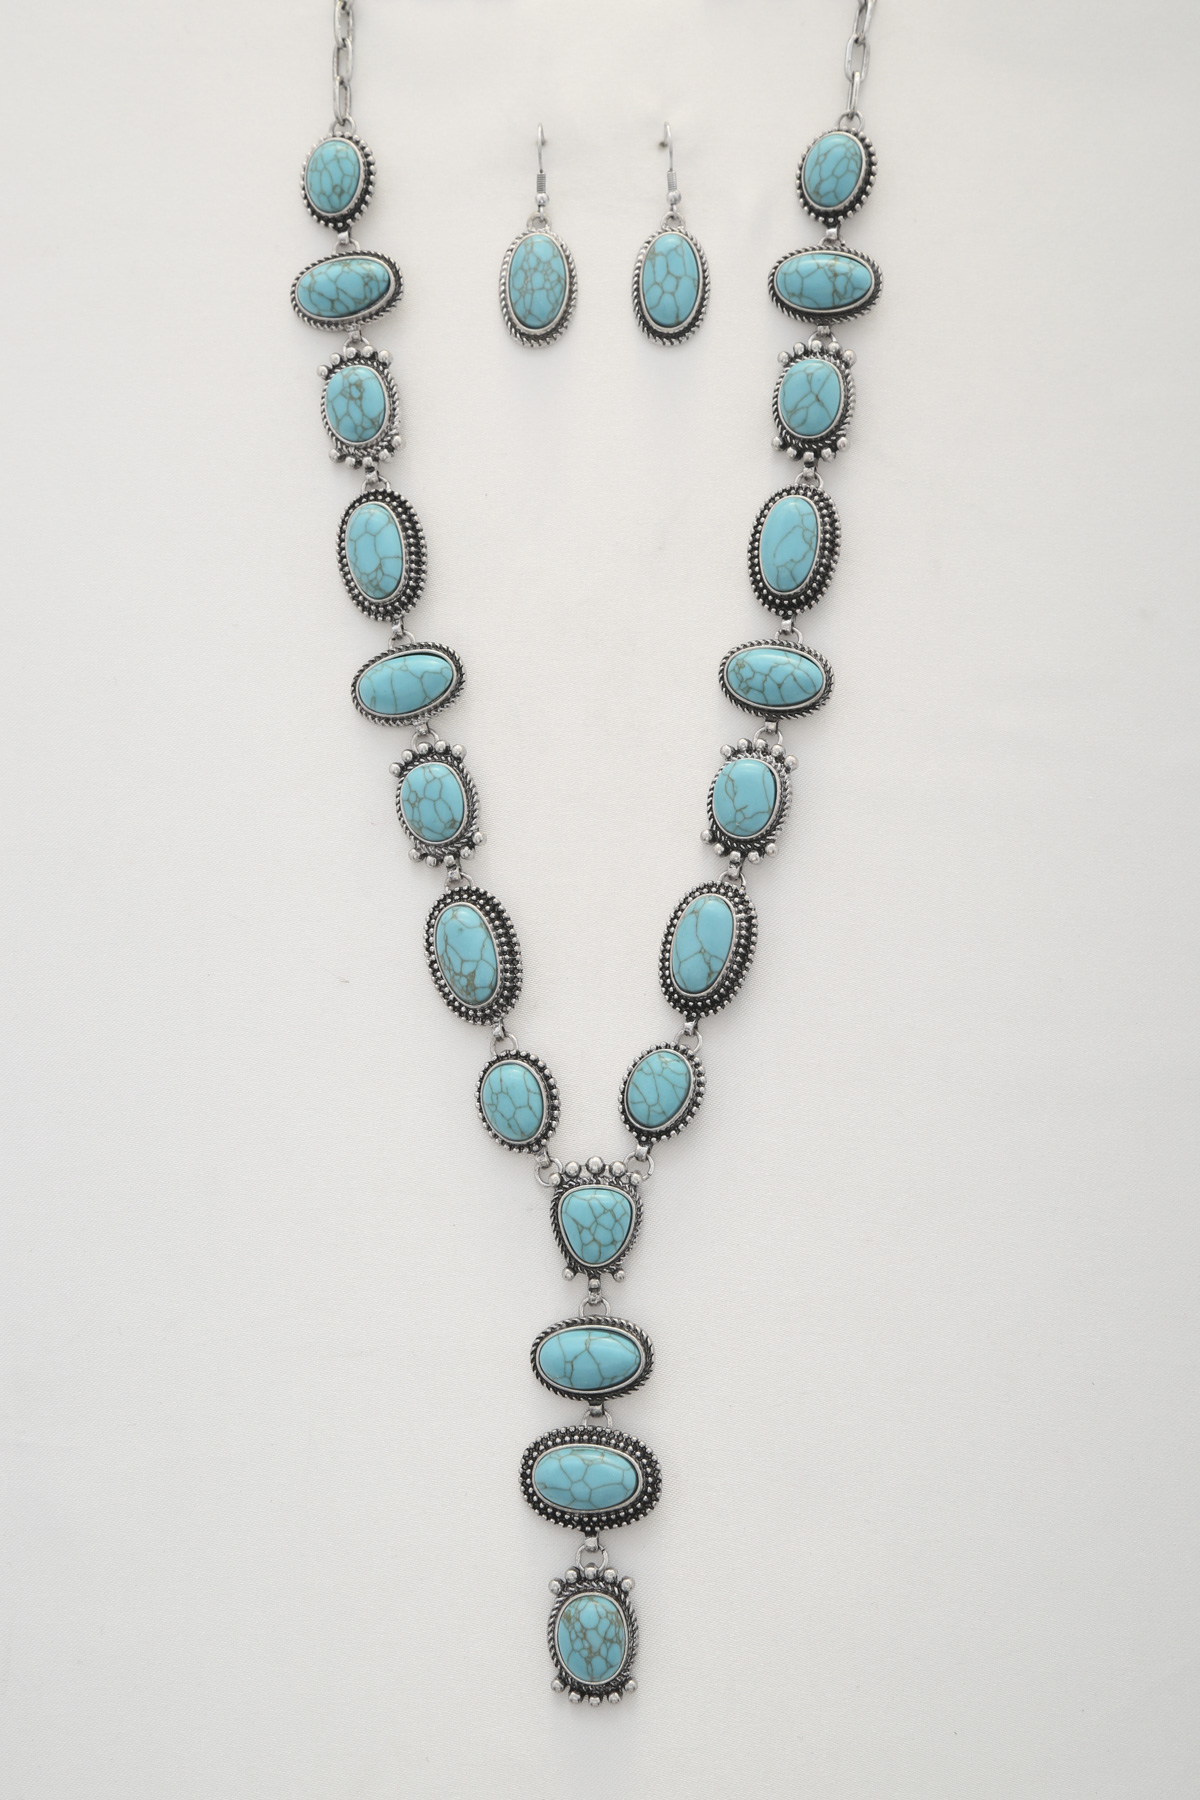 RODEO WESTERN OVAL TURQUOISE BEAD Y SHAPE NECKLACE